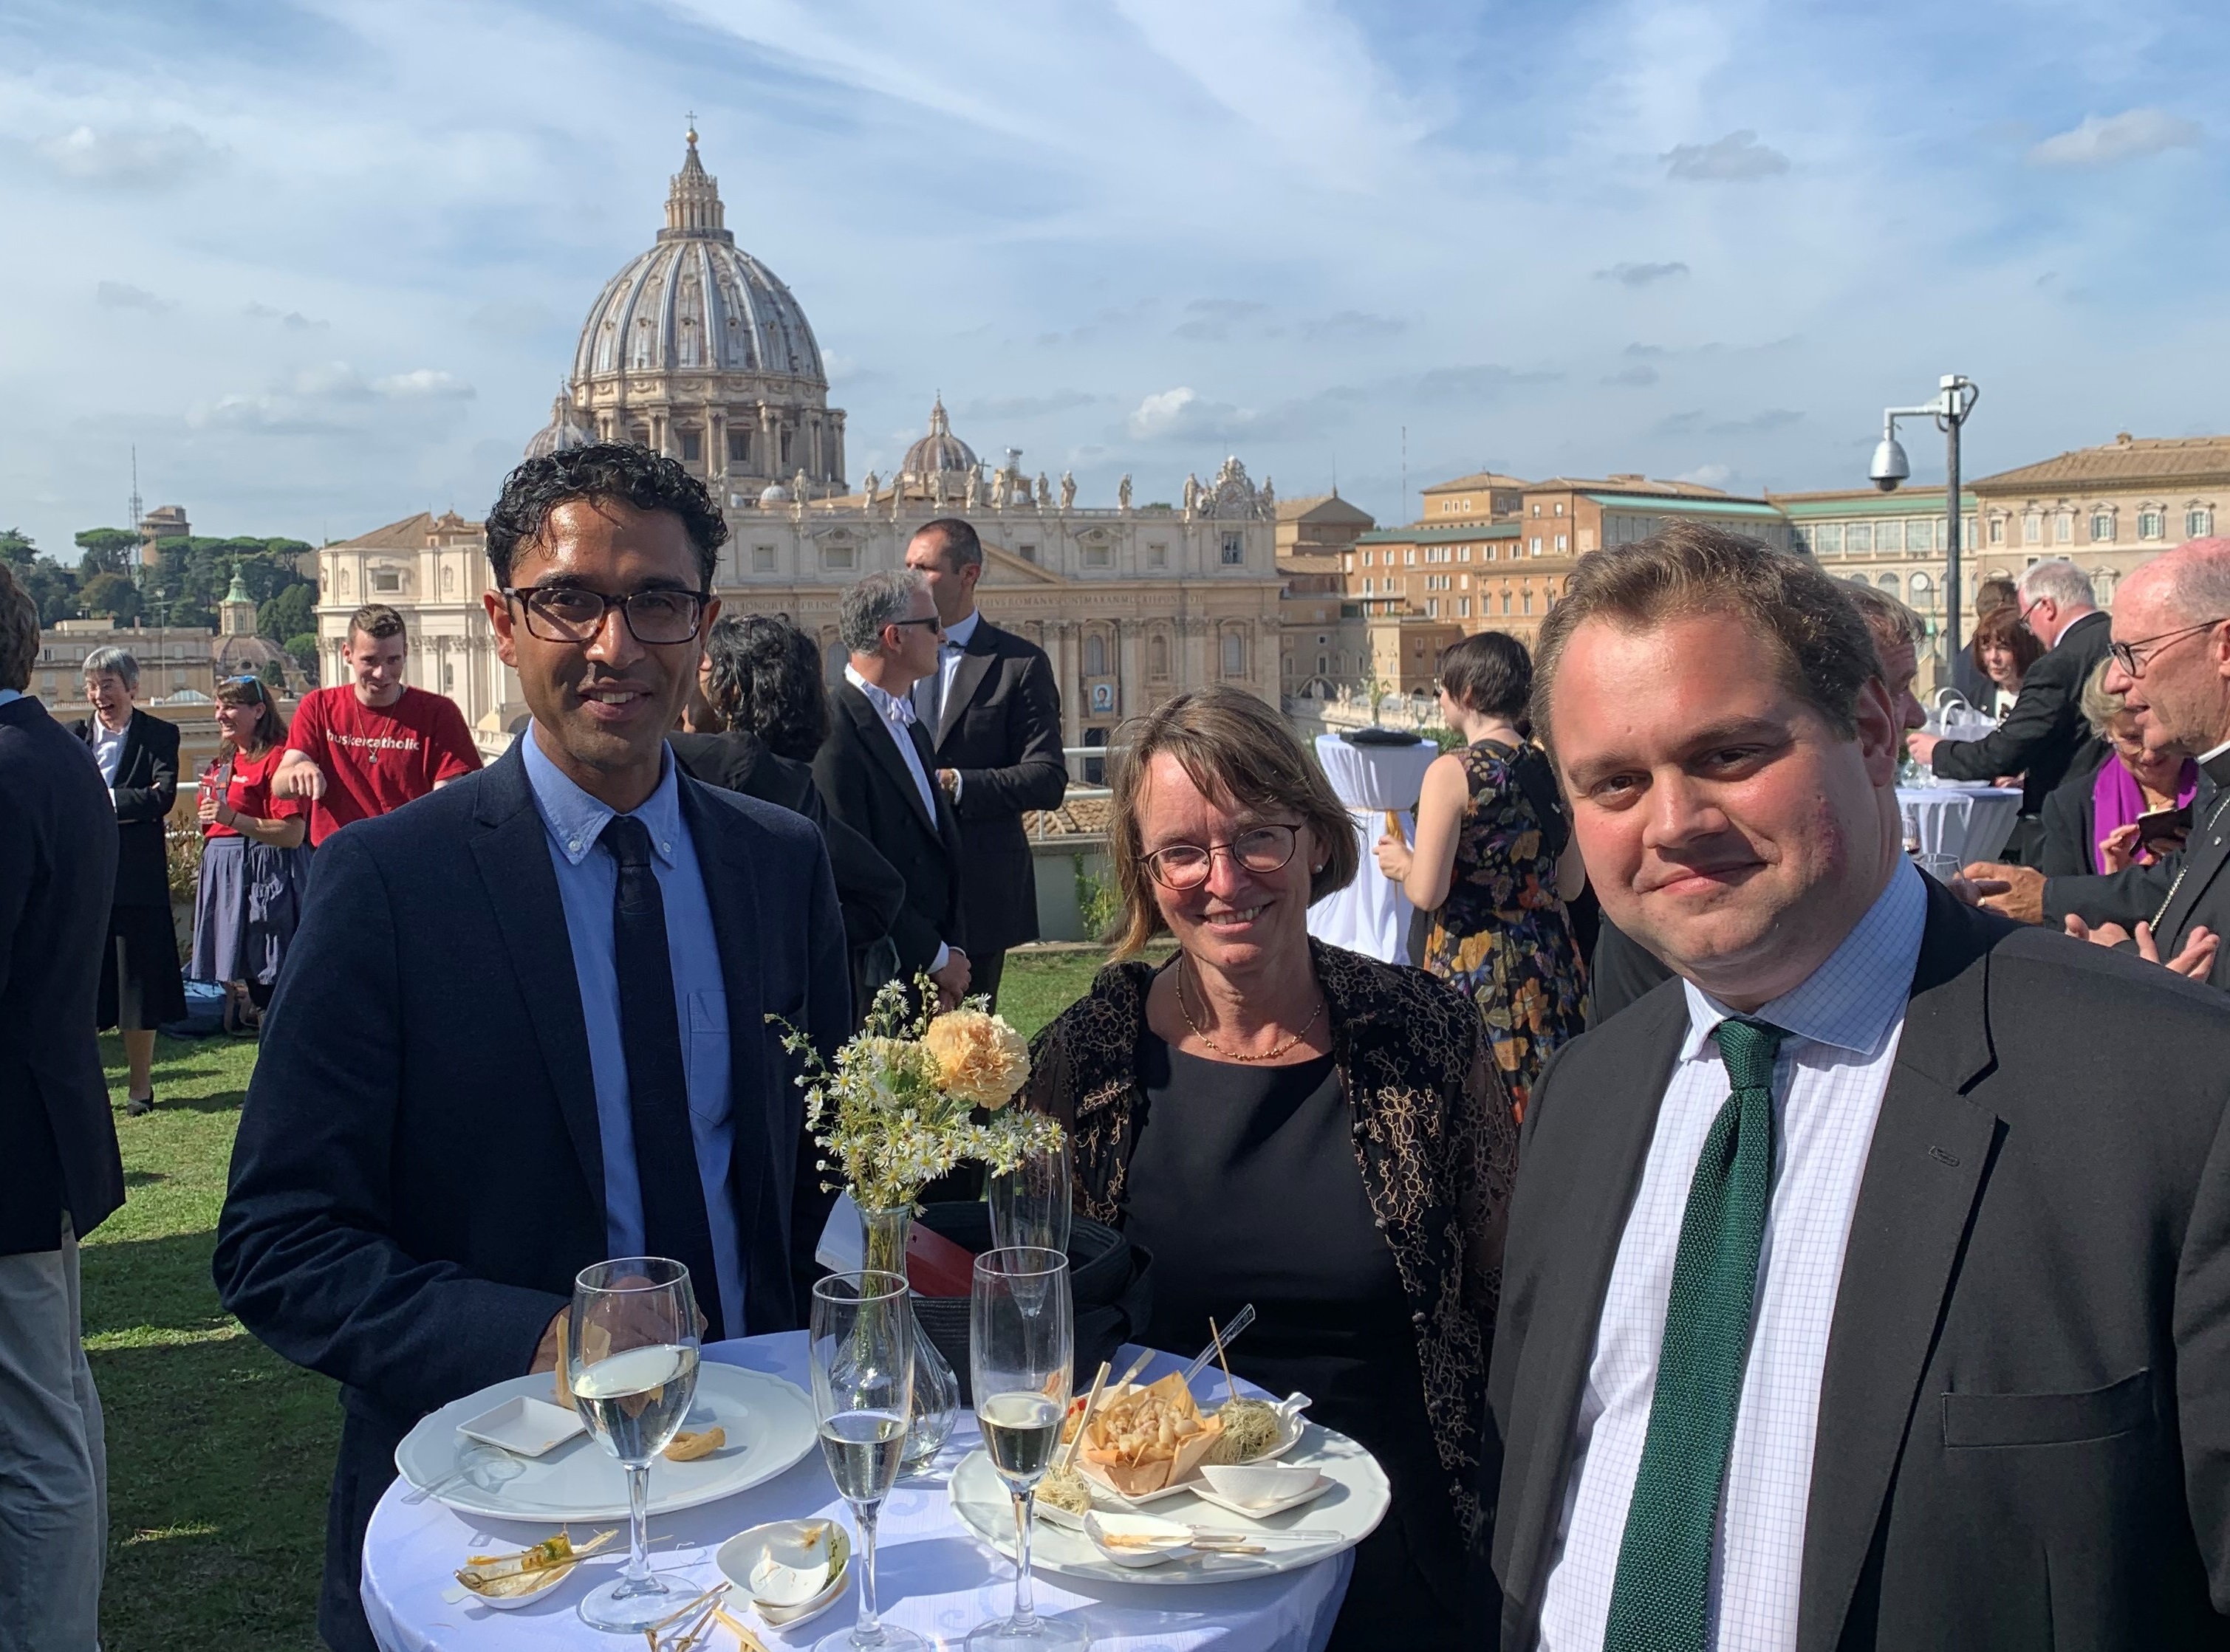 Trinity College Philosophy Fellow Anil Gomes, President Hilary Boulding, and Junior Research Fellow Tristan Franklinos at the canonisation ceremony in Rome for Cardinal Newman.